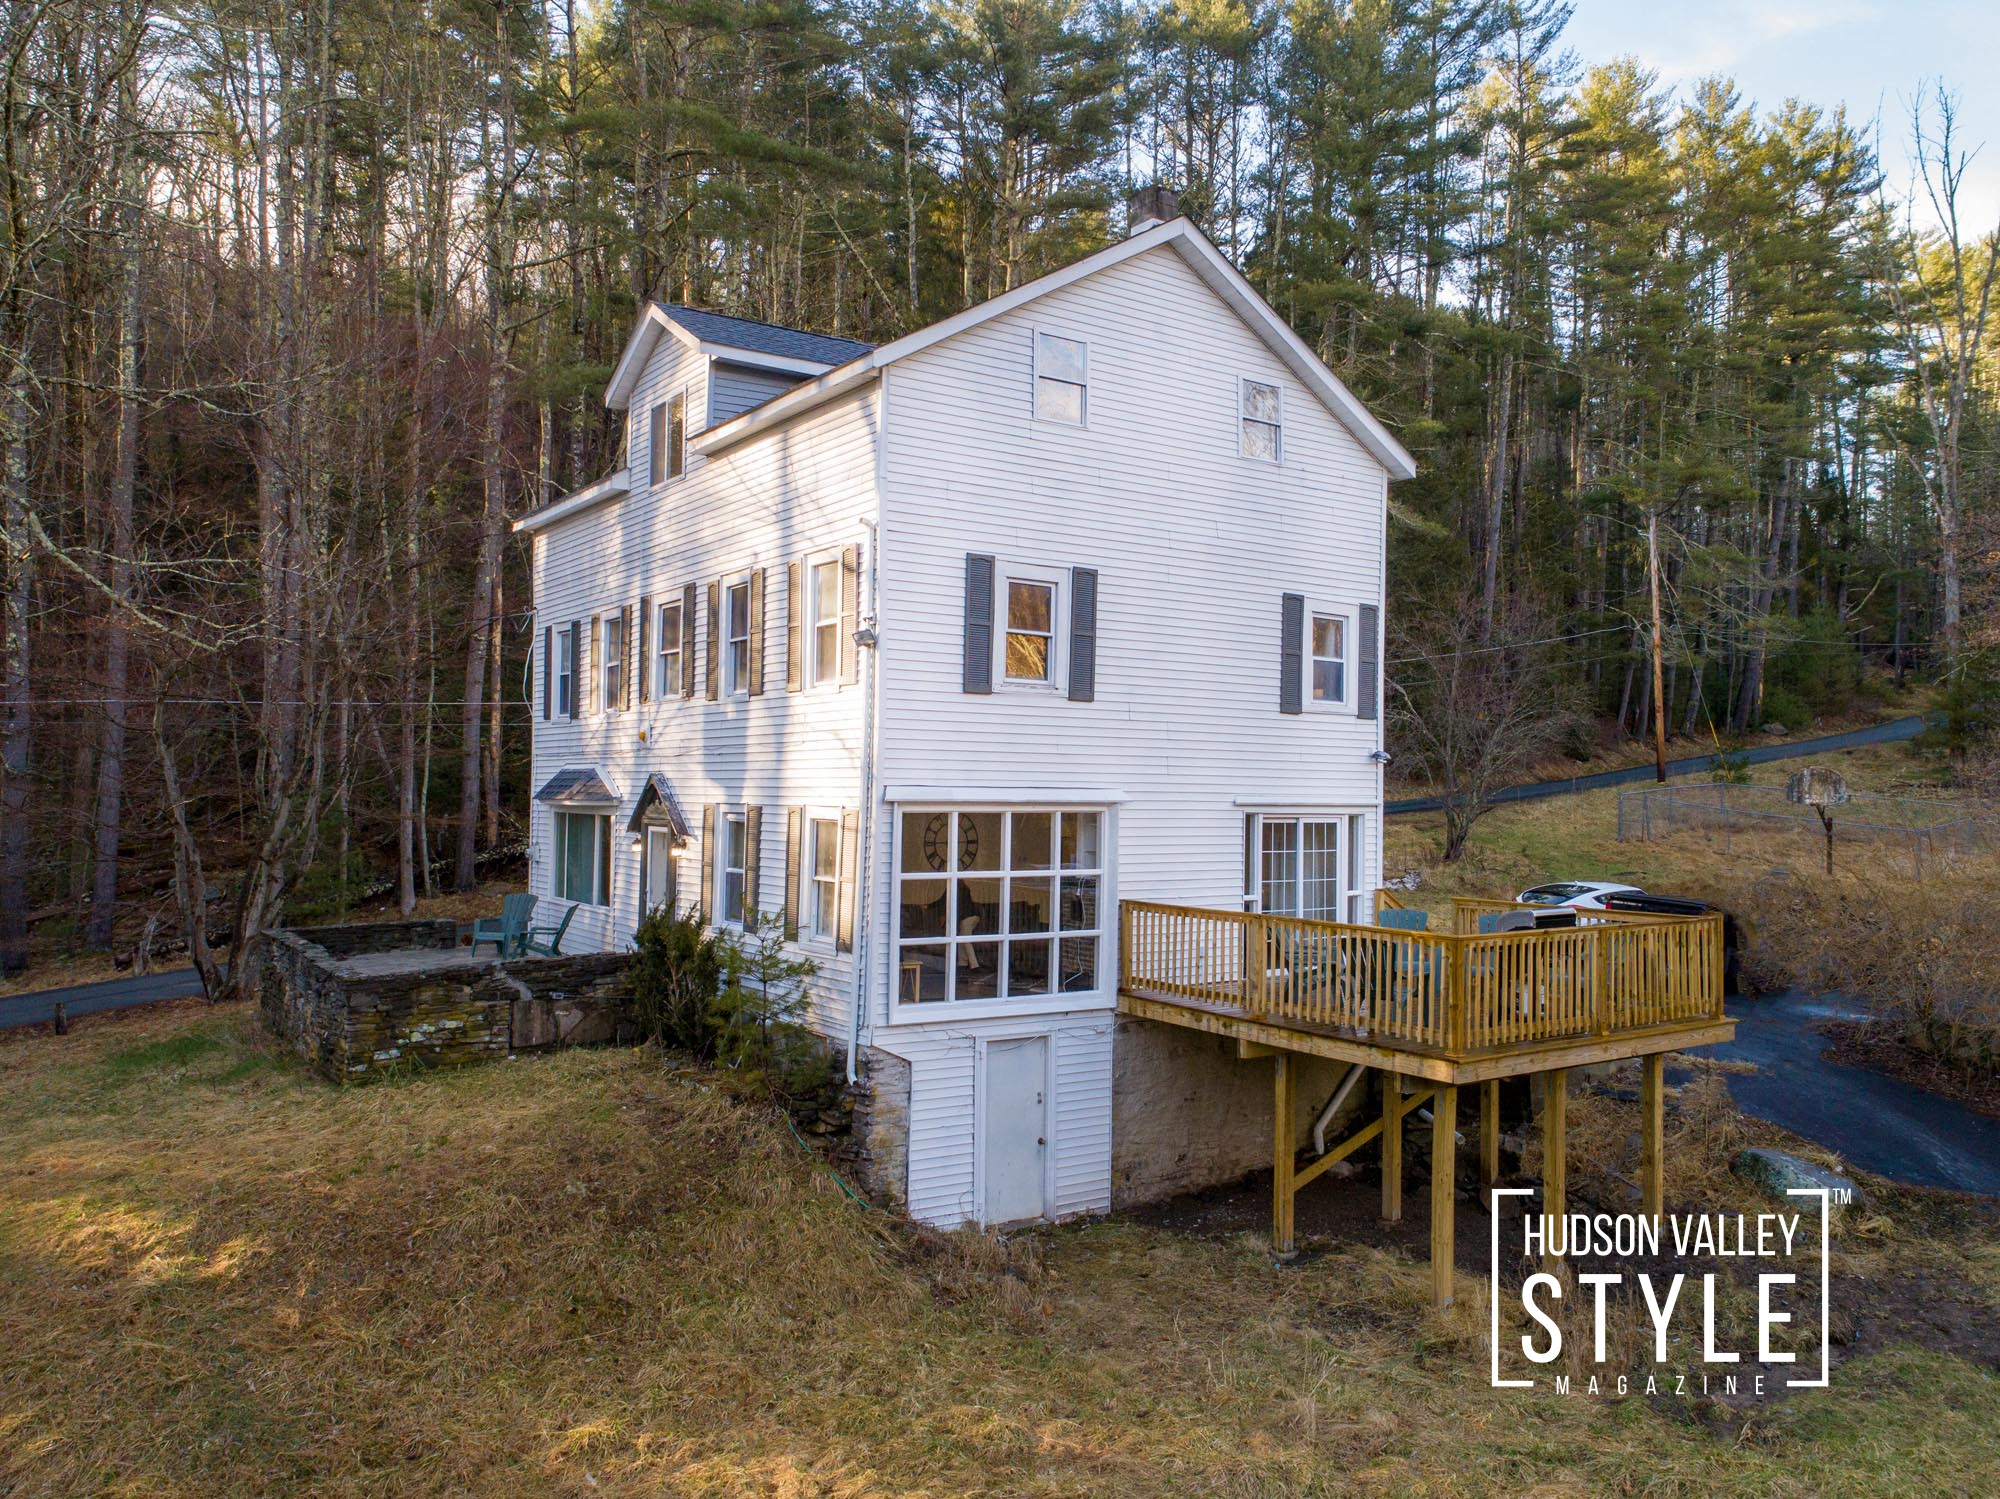 The King of the Hill – Farmhouse for Sale in the Catskill Mountains – Home for Sale: 62 Eden Road, Cuddebackville, NY 12729 – Listed for $550,000 / Listing by ALLUVION Real Estate / Listing Agent: Xiomara Marrero – Text or Call: 845-797-5070 – Photography by ALLUVION MEDIA